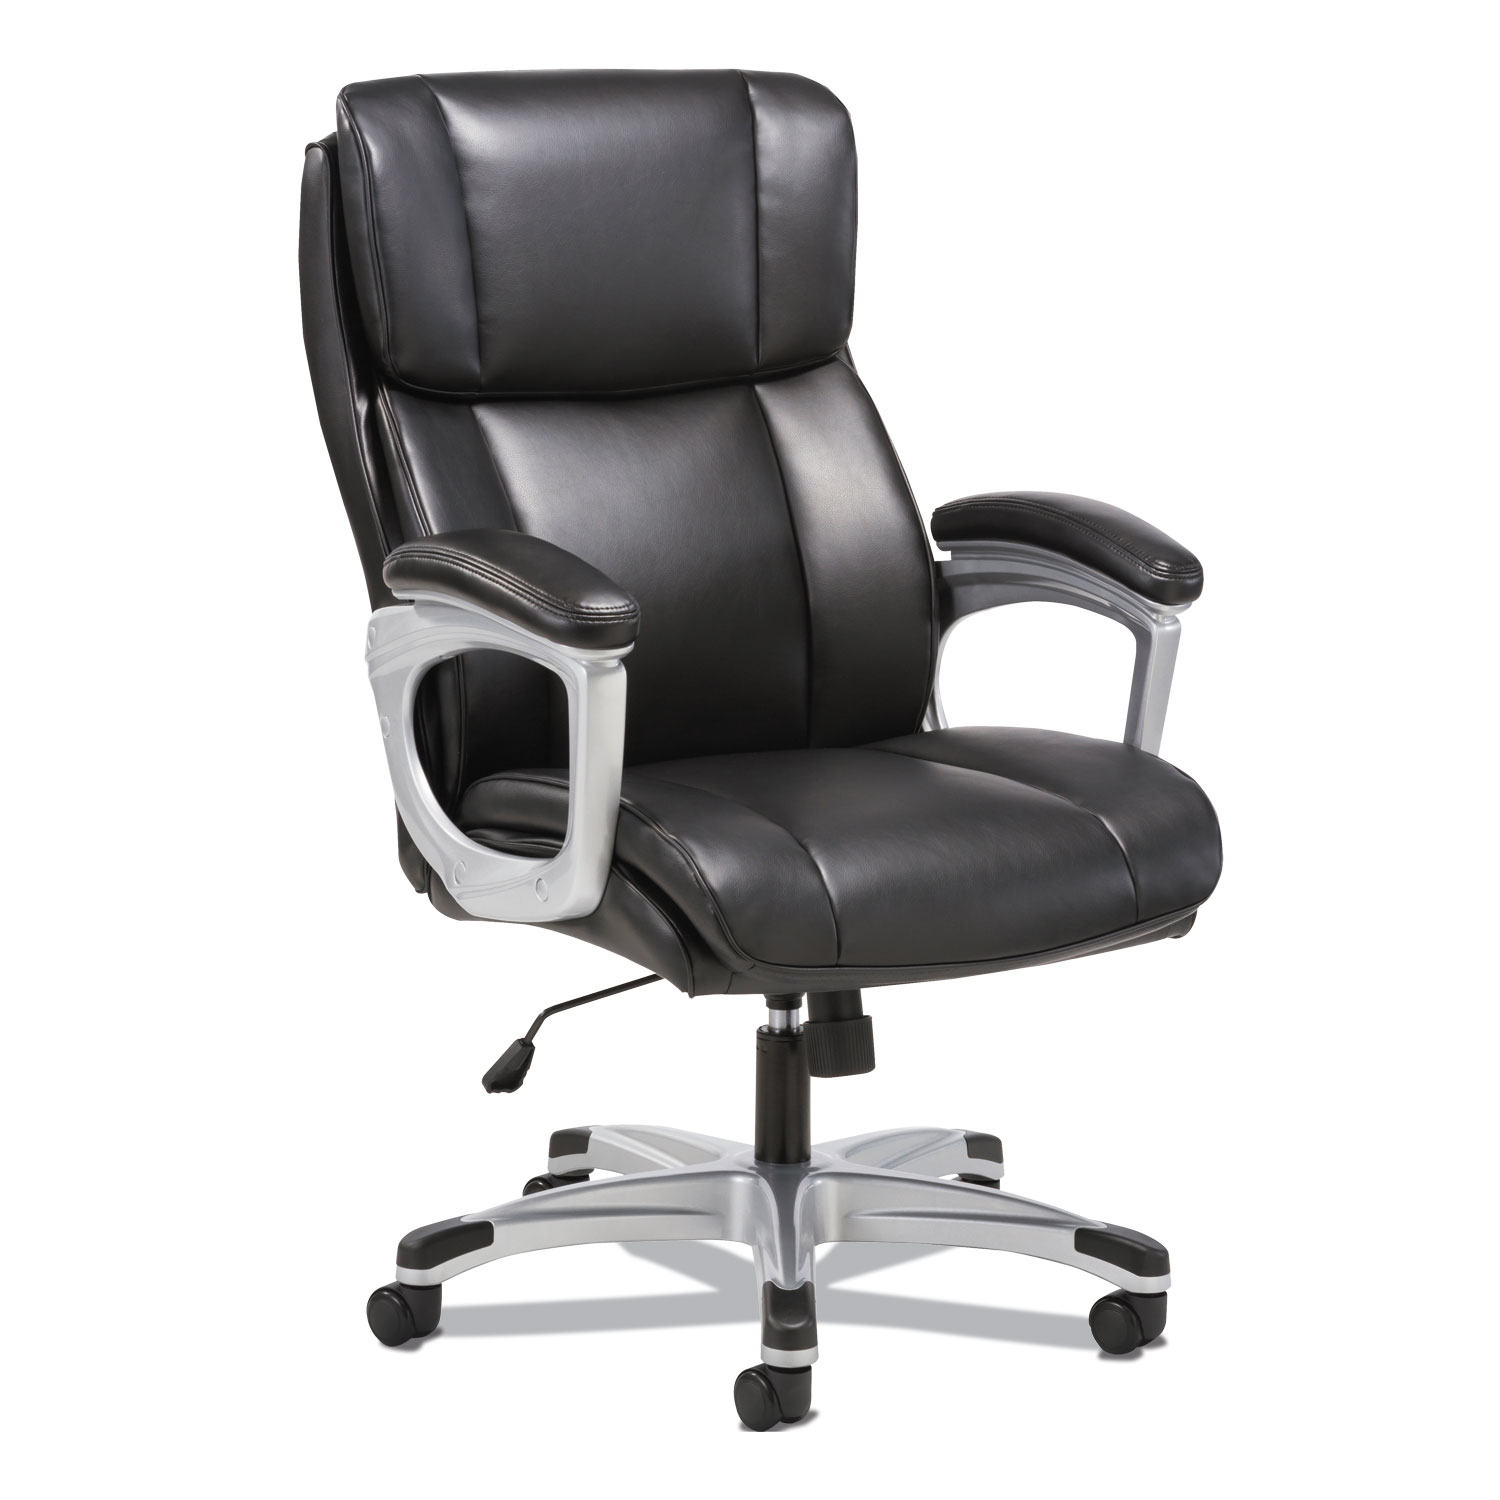  Sadie BSXVST315 3-Fifteen Executive High-Back Chair, Supports up to 225 lbs., Black Seat/Black Back, Aluminum Base (BSXVST315) 